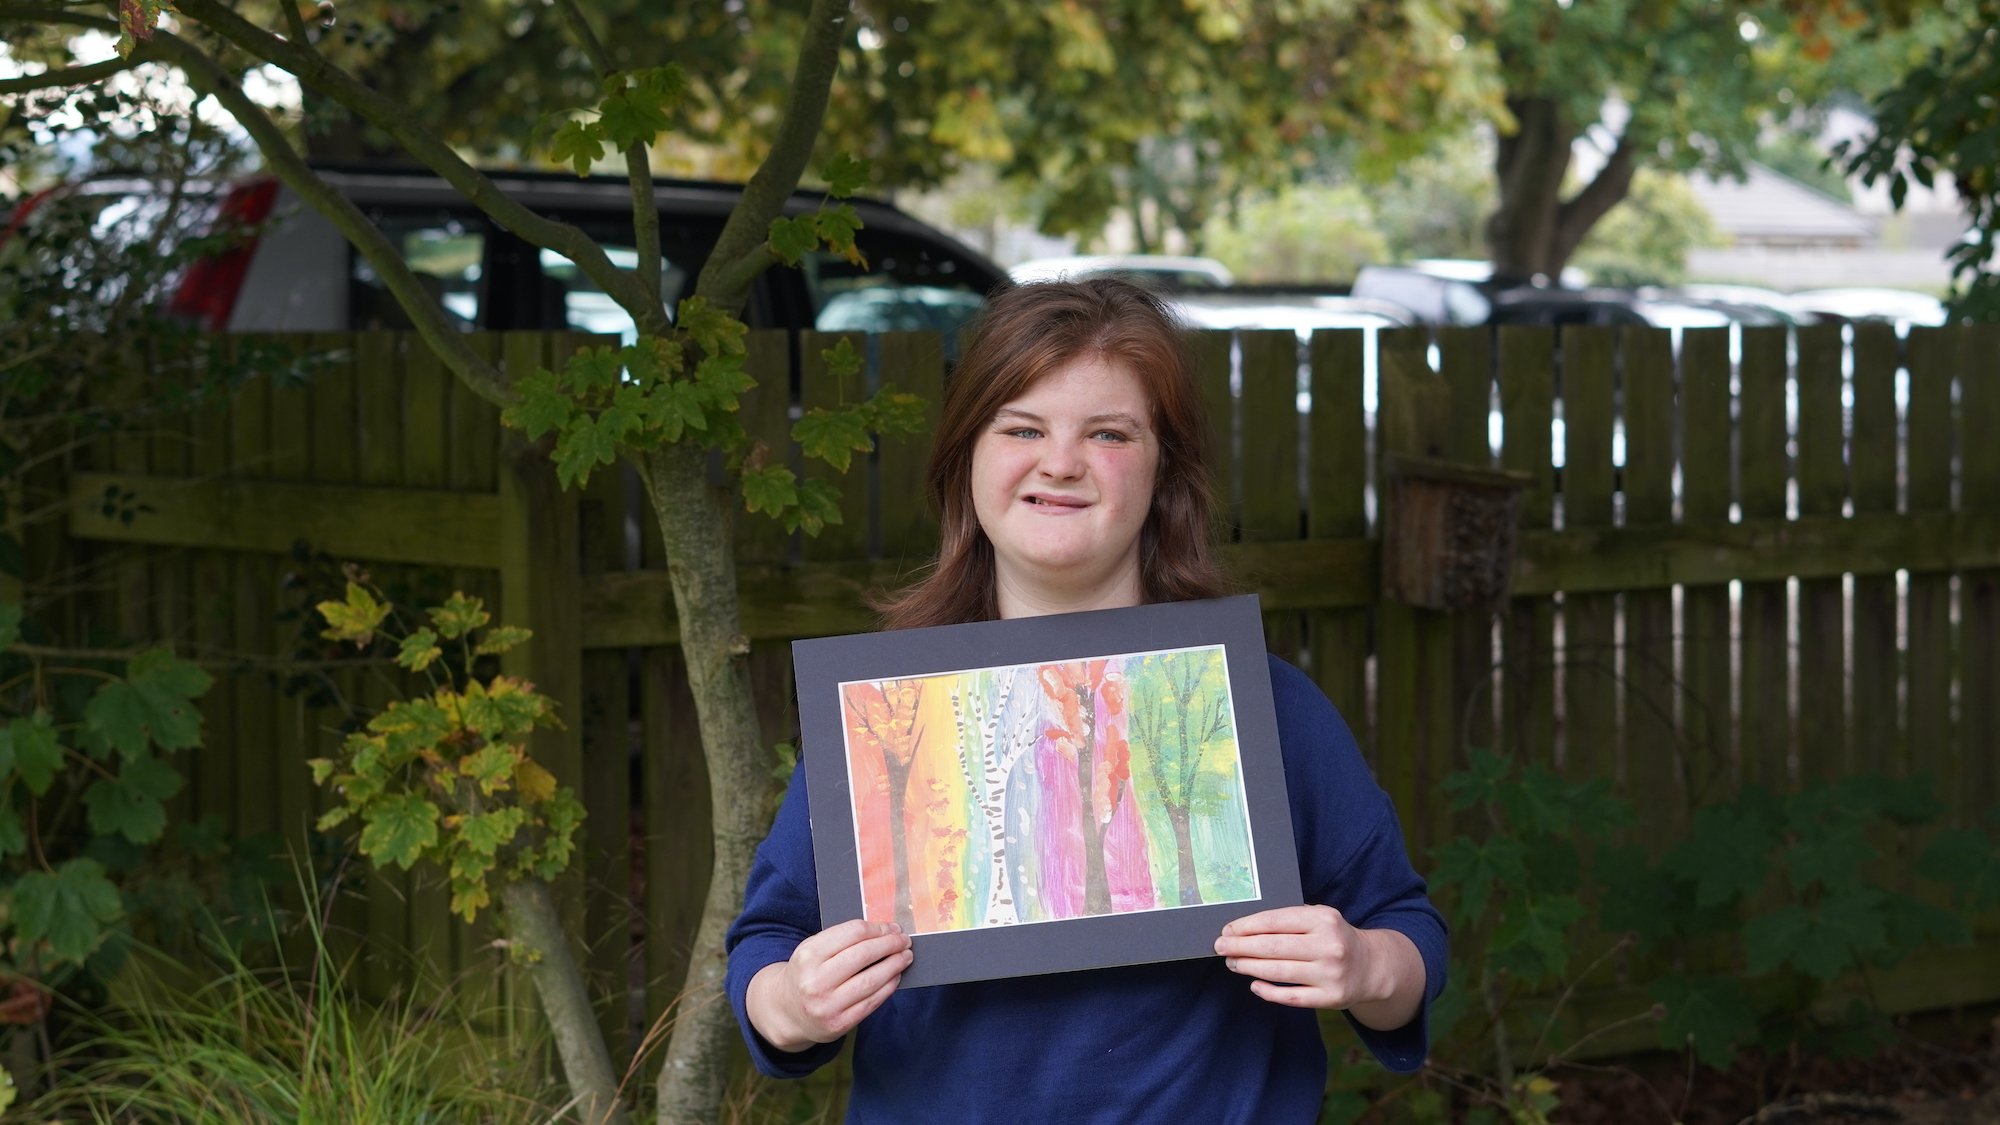 Isabelle with her artwork from Beaumont College who won an award at Unique Art Awards 2022